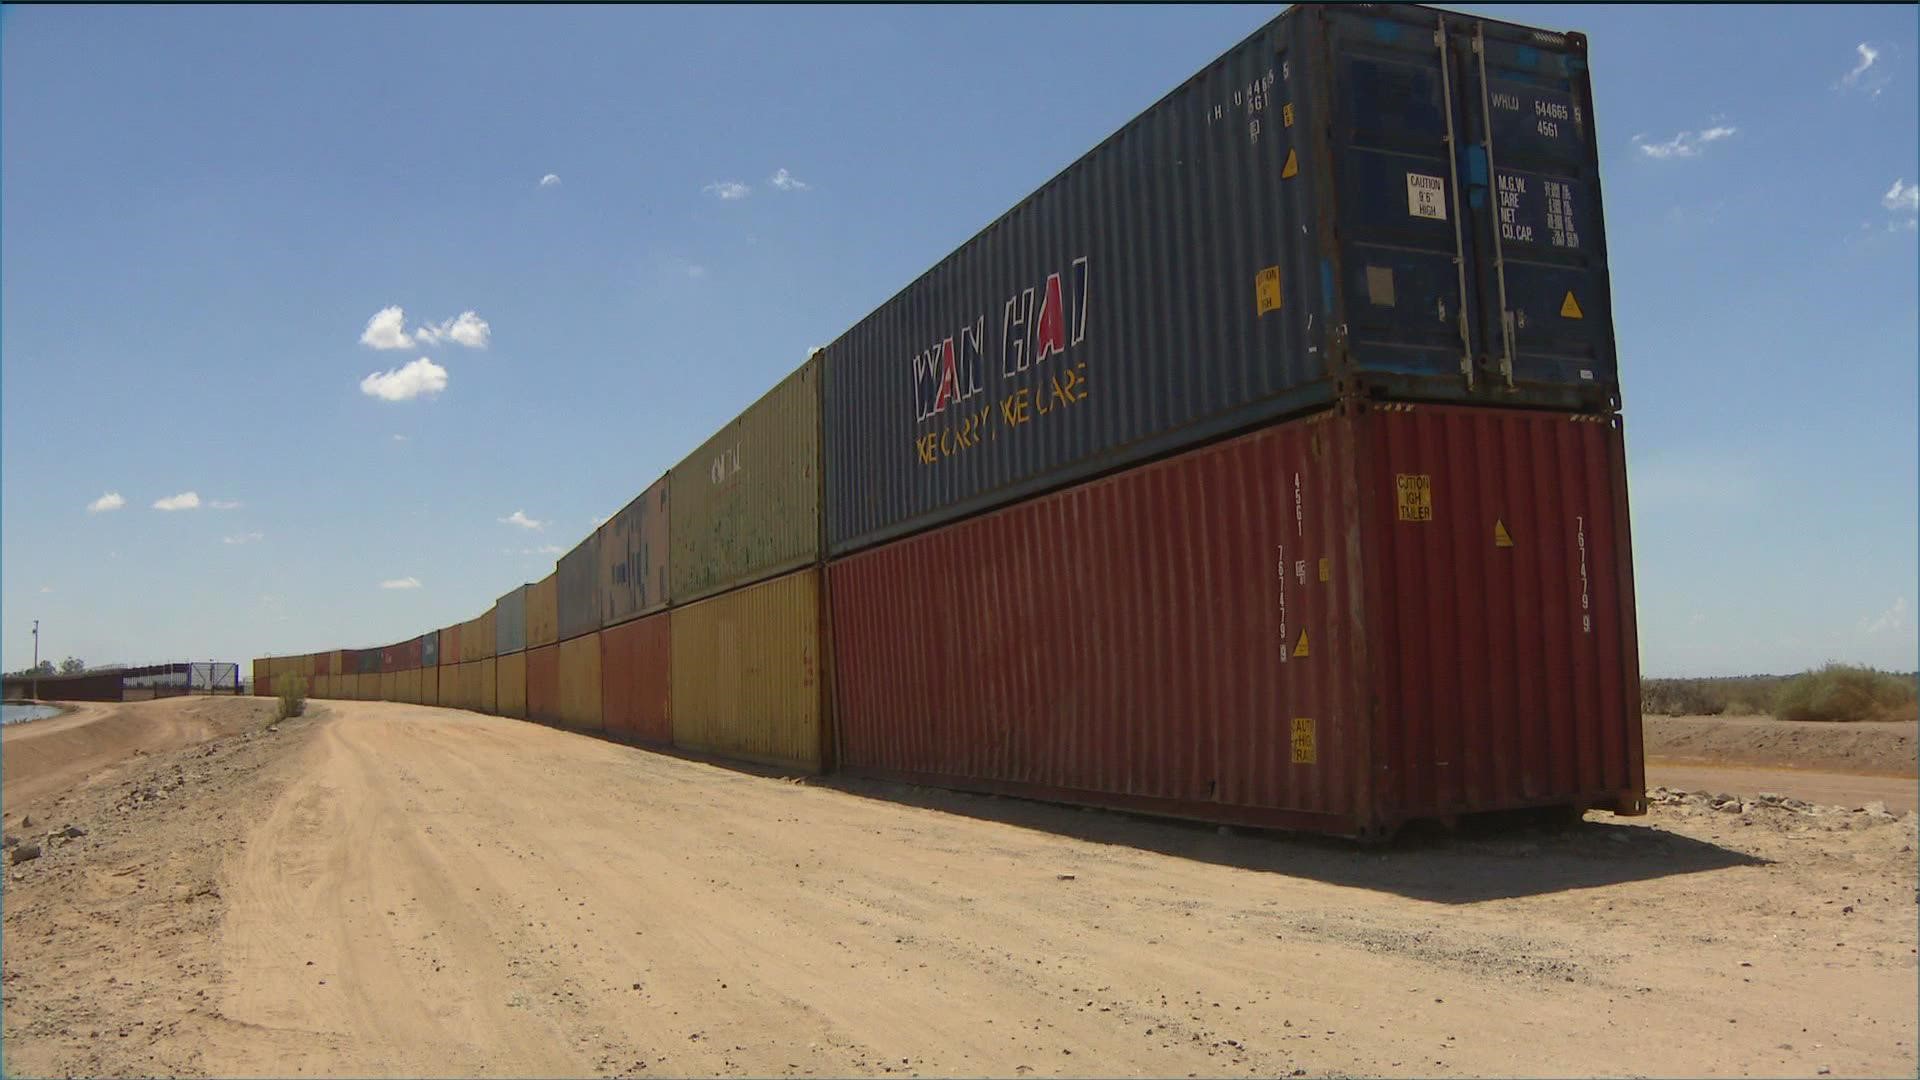 Questions remain if the containers will act as a deterrent for migrants hoping to cross the border